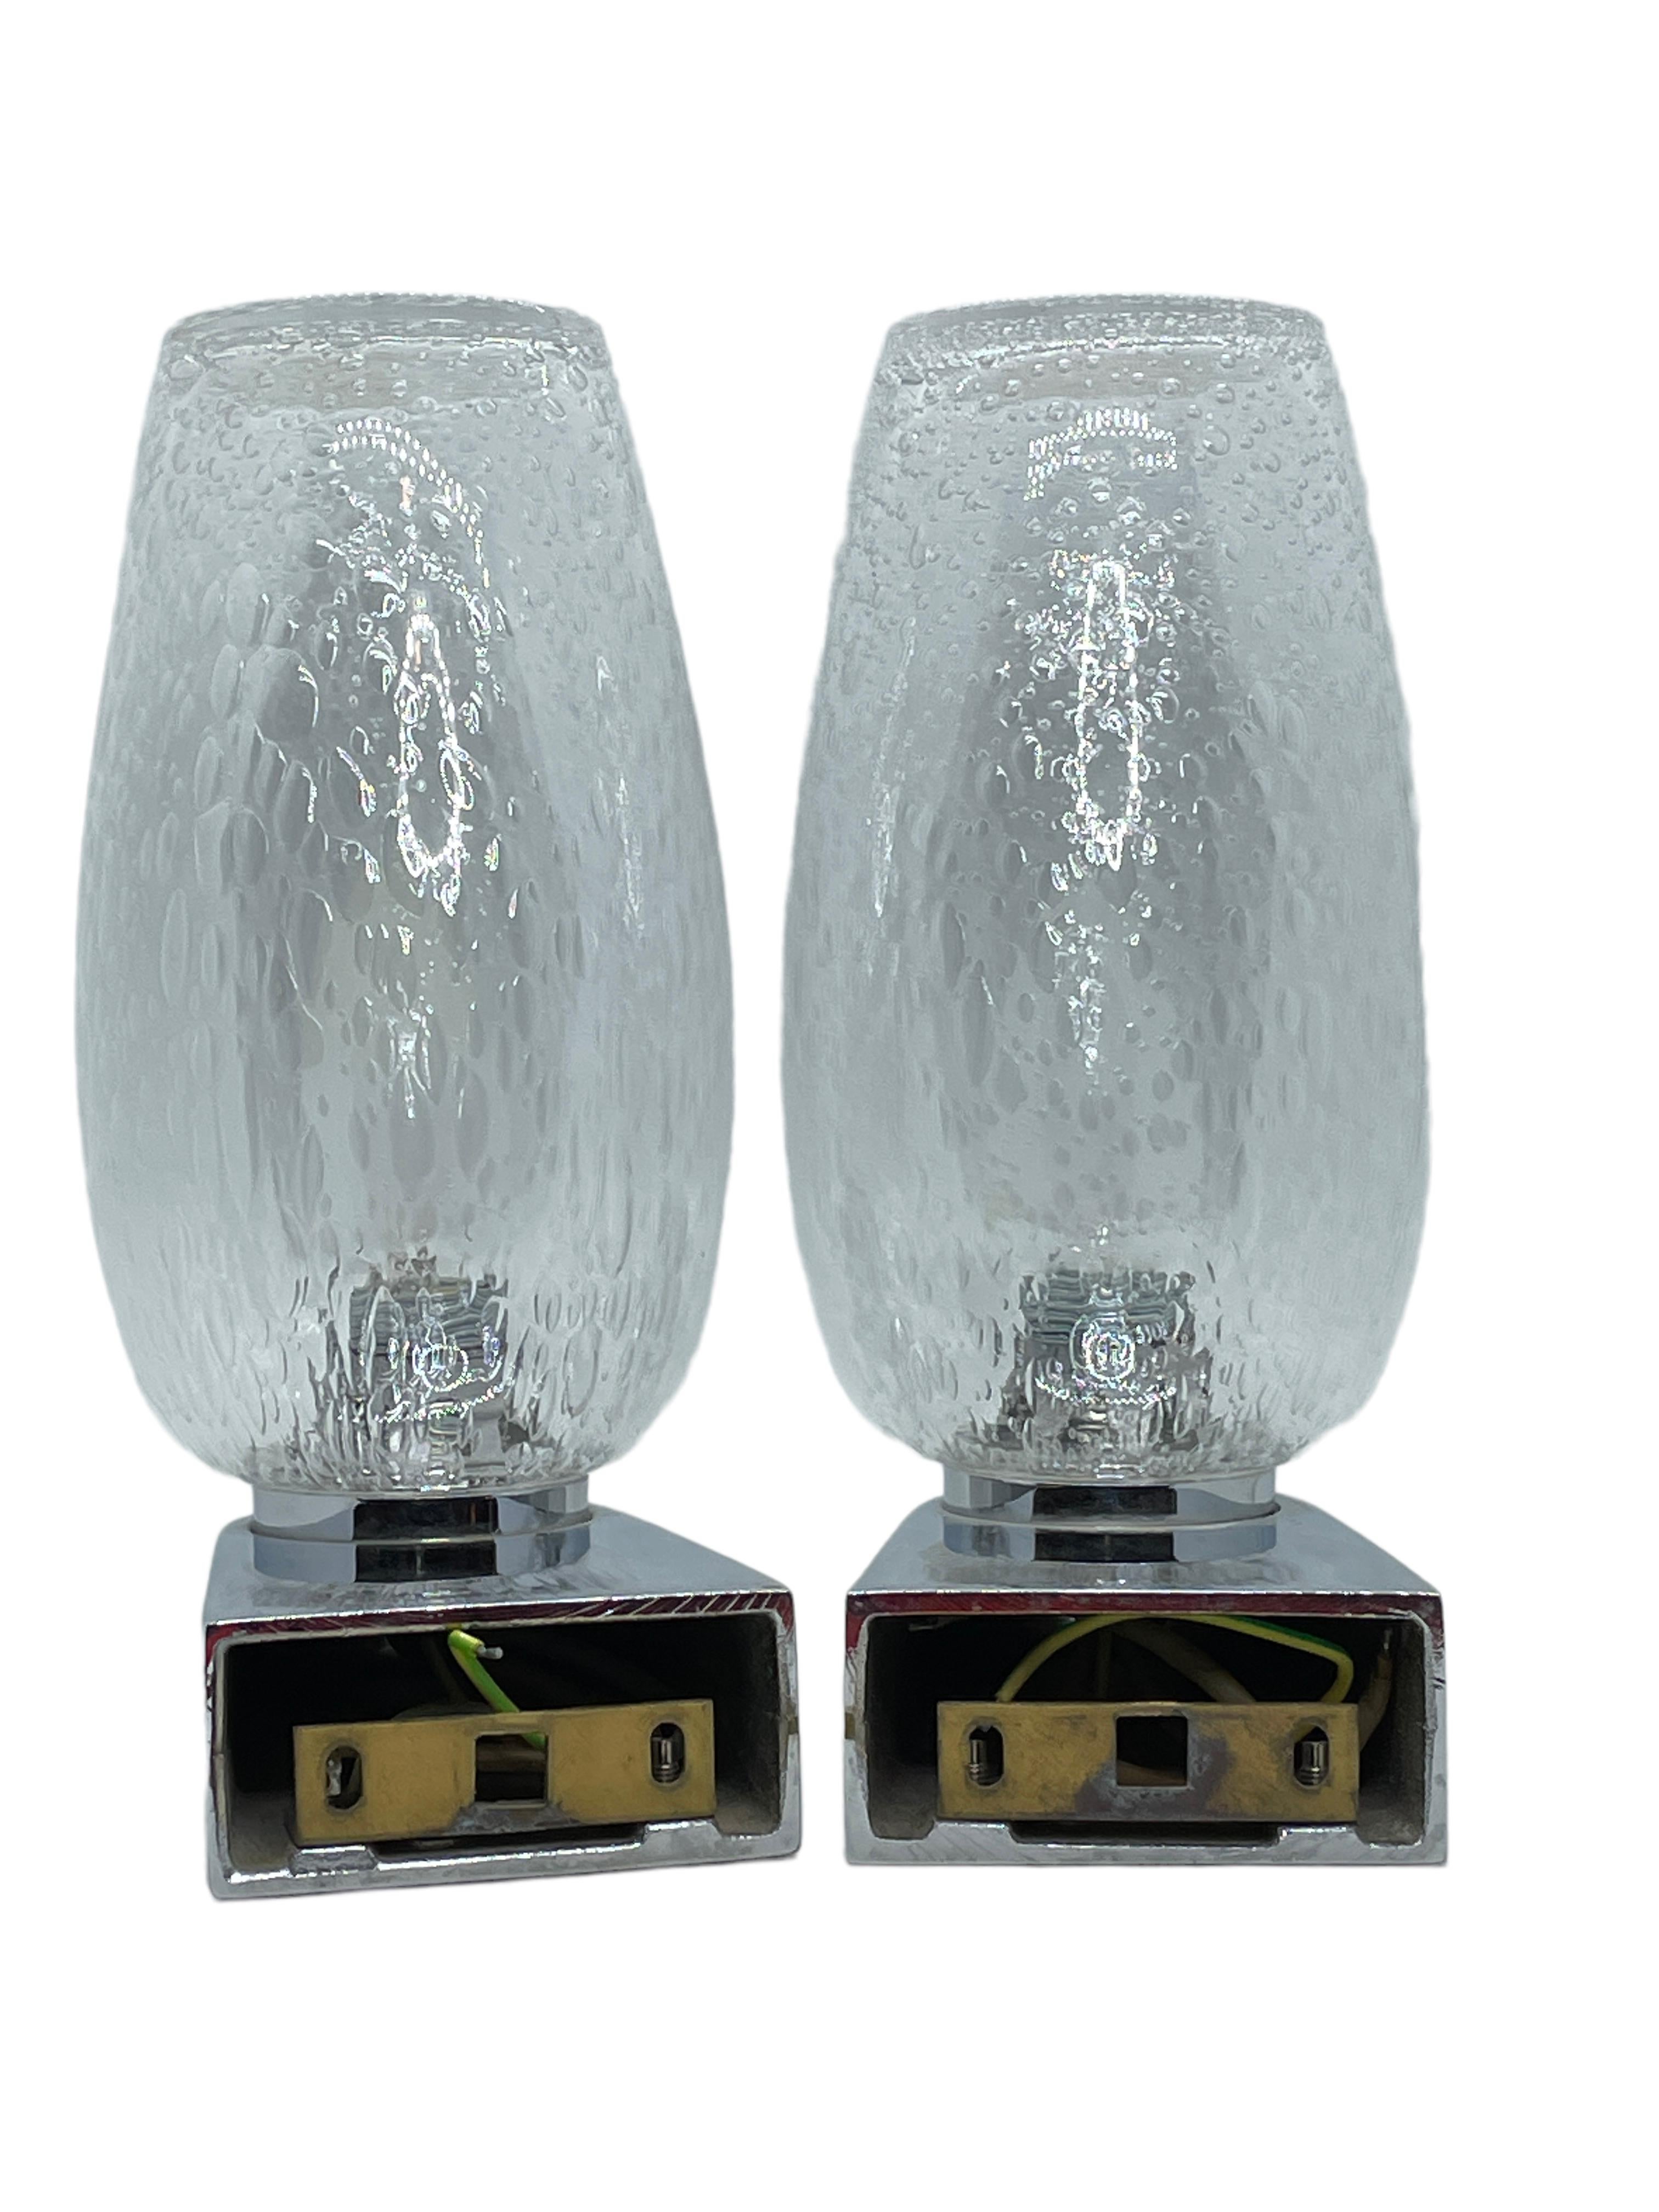 Pair of 1970s German Bubble Glass and Chrome Sconces, Vintage Mid-Century Modern For Sale 5